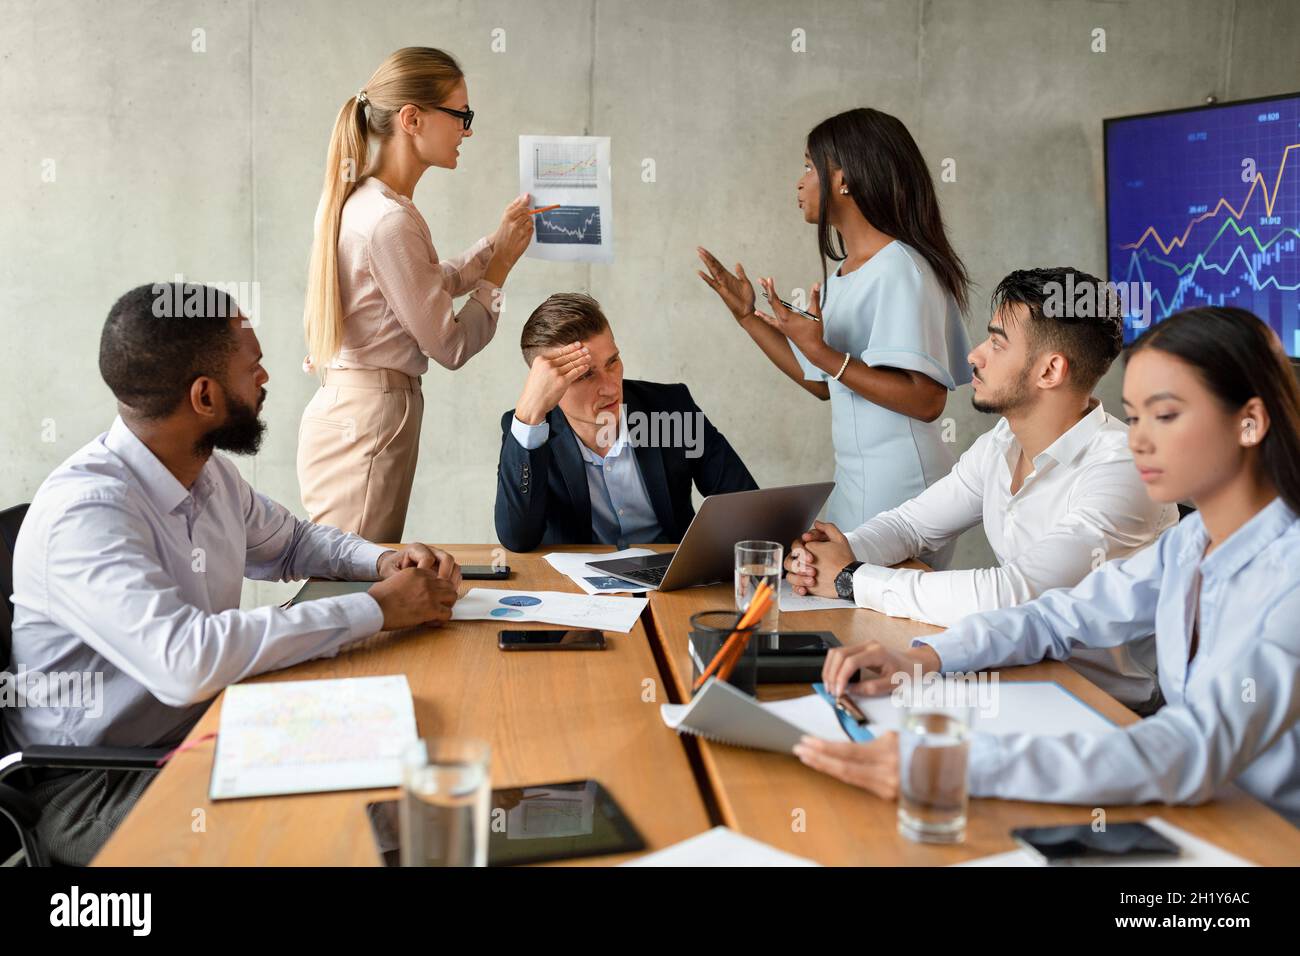 Business Conflicts. Two Female Employees Arguing During Corporate Meeting In Office Stock Photo